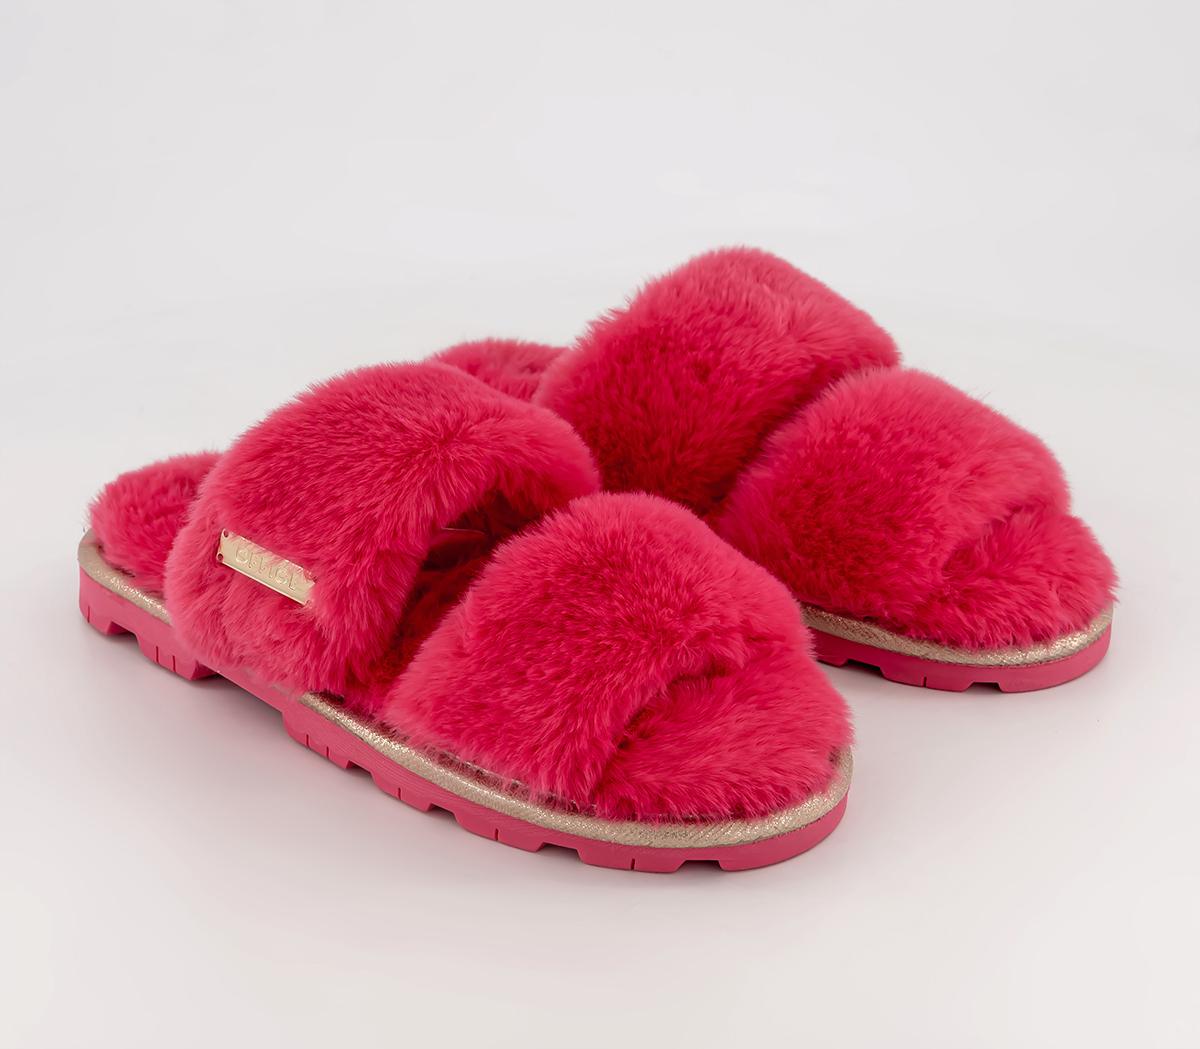 OFFICE Womens Roxy Double Strap Slippers Hot Pink, 5 - 6